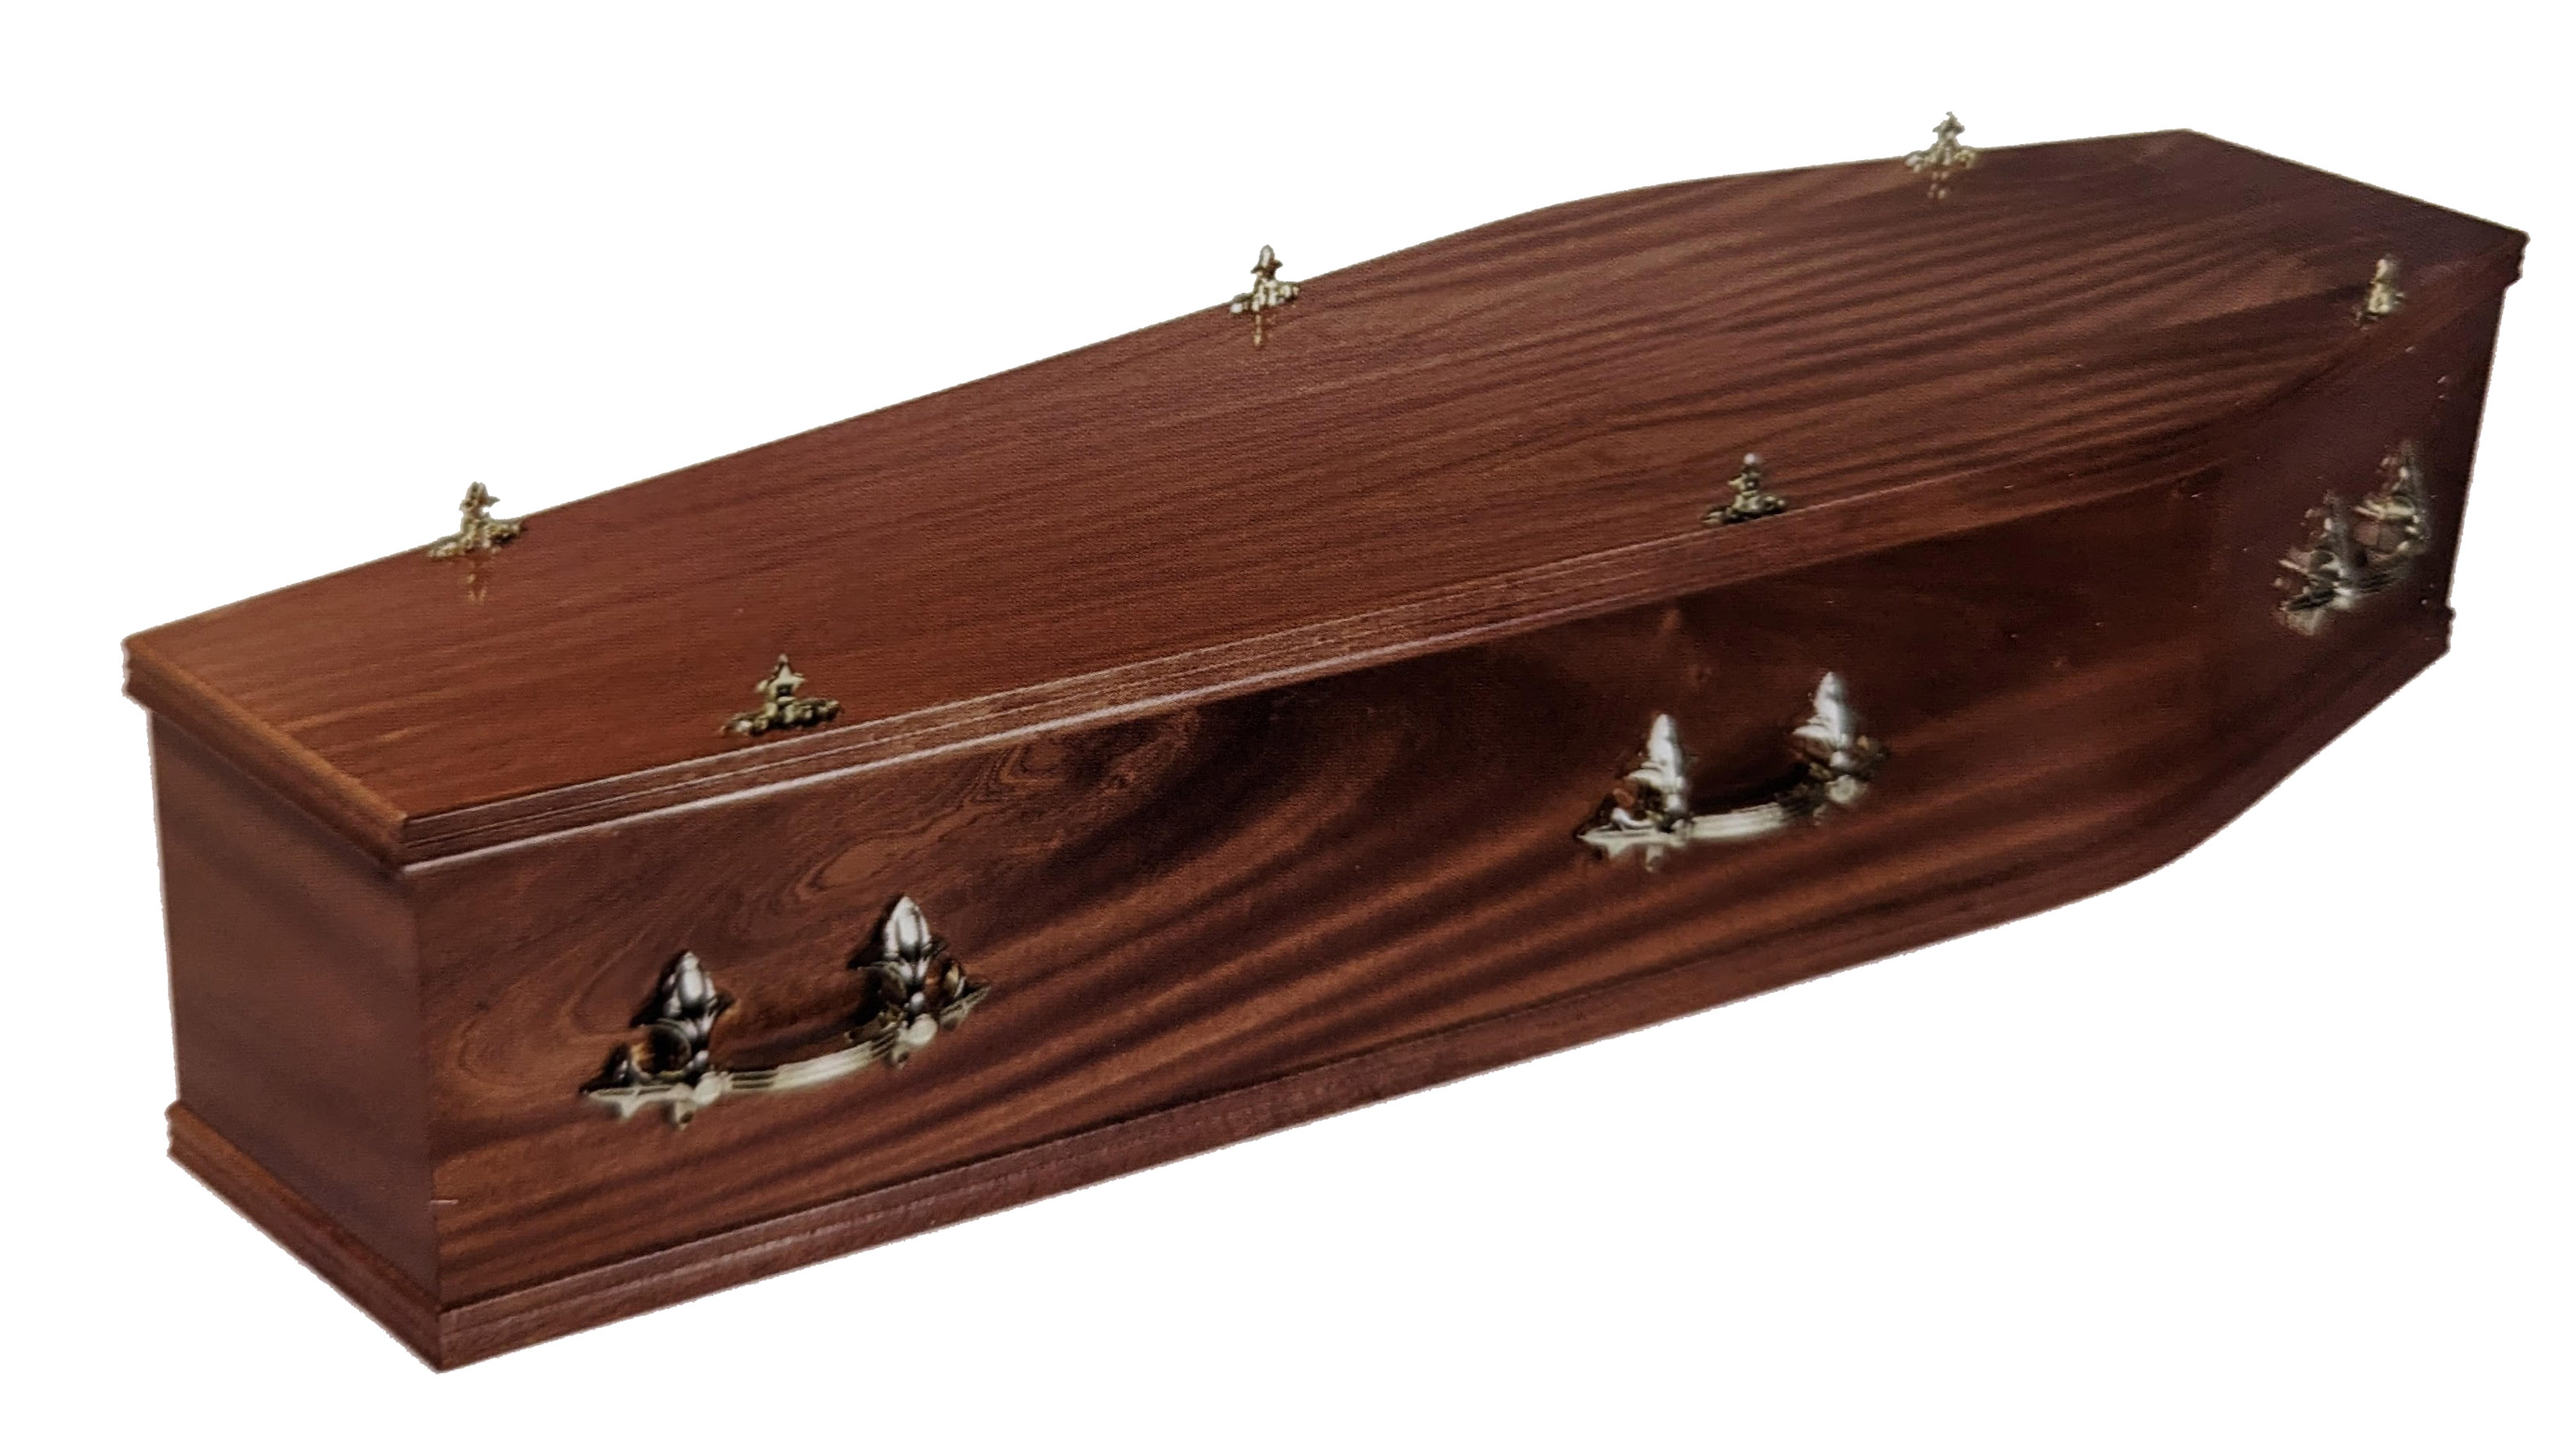 The Milldale coffin